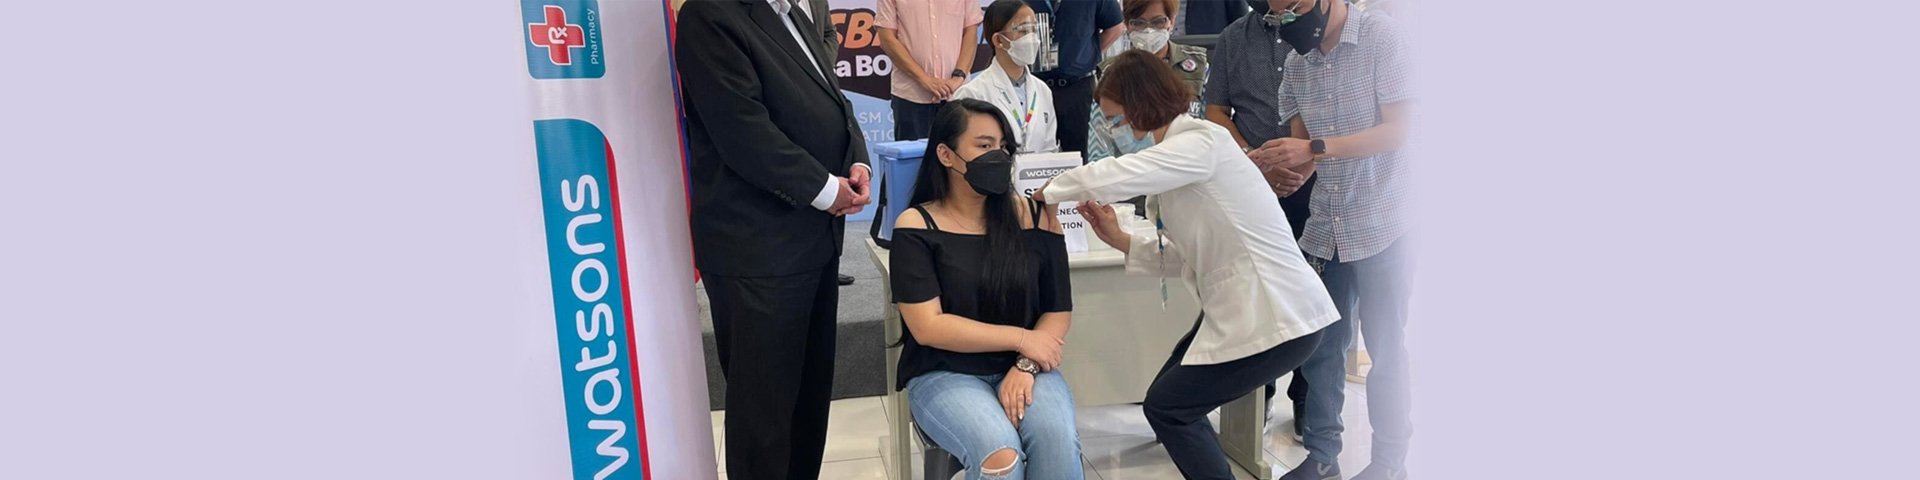 Watsons Philippines Provides COVID-19 Vaccination Service